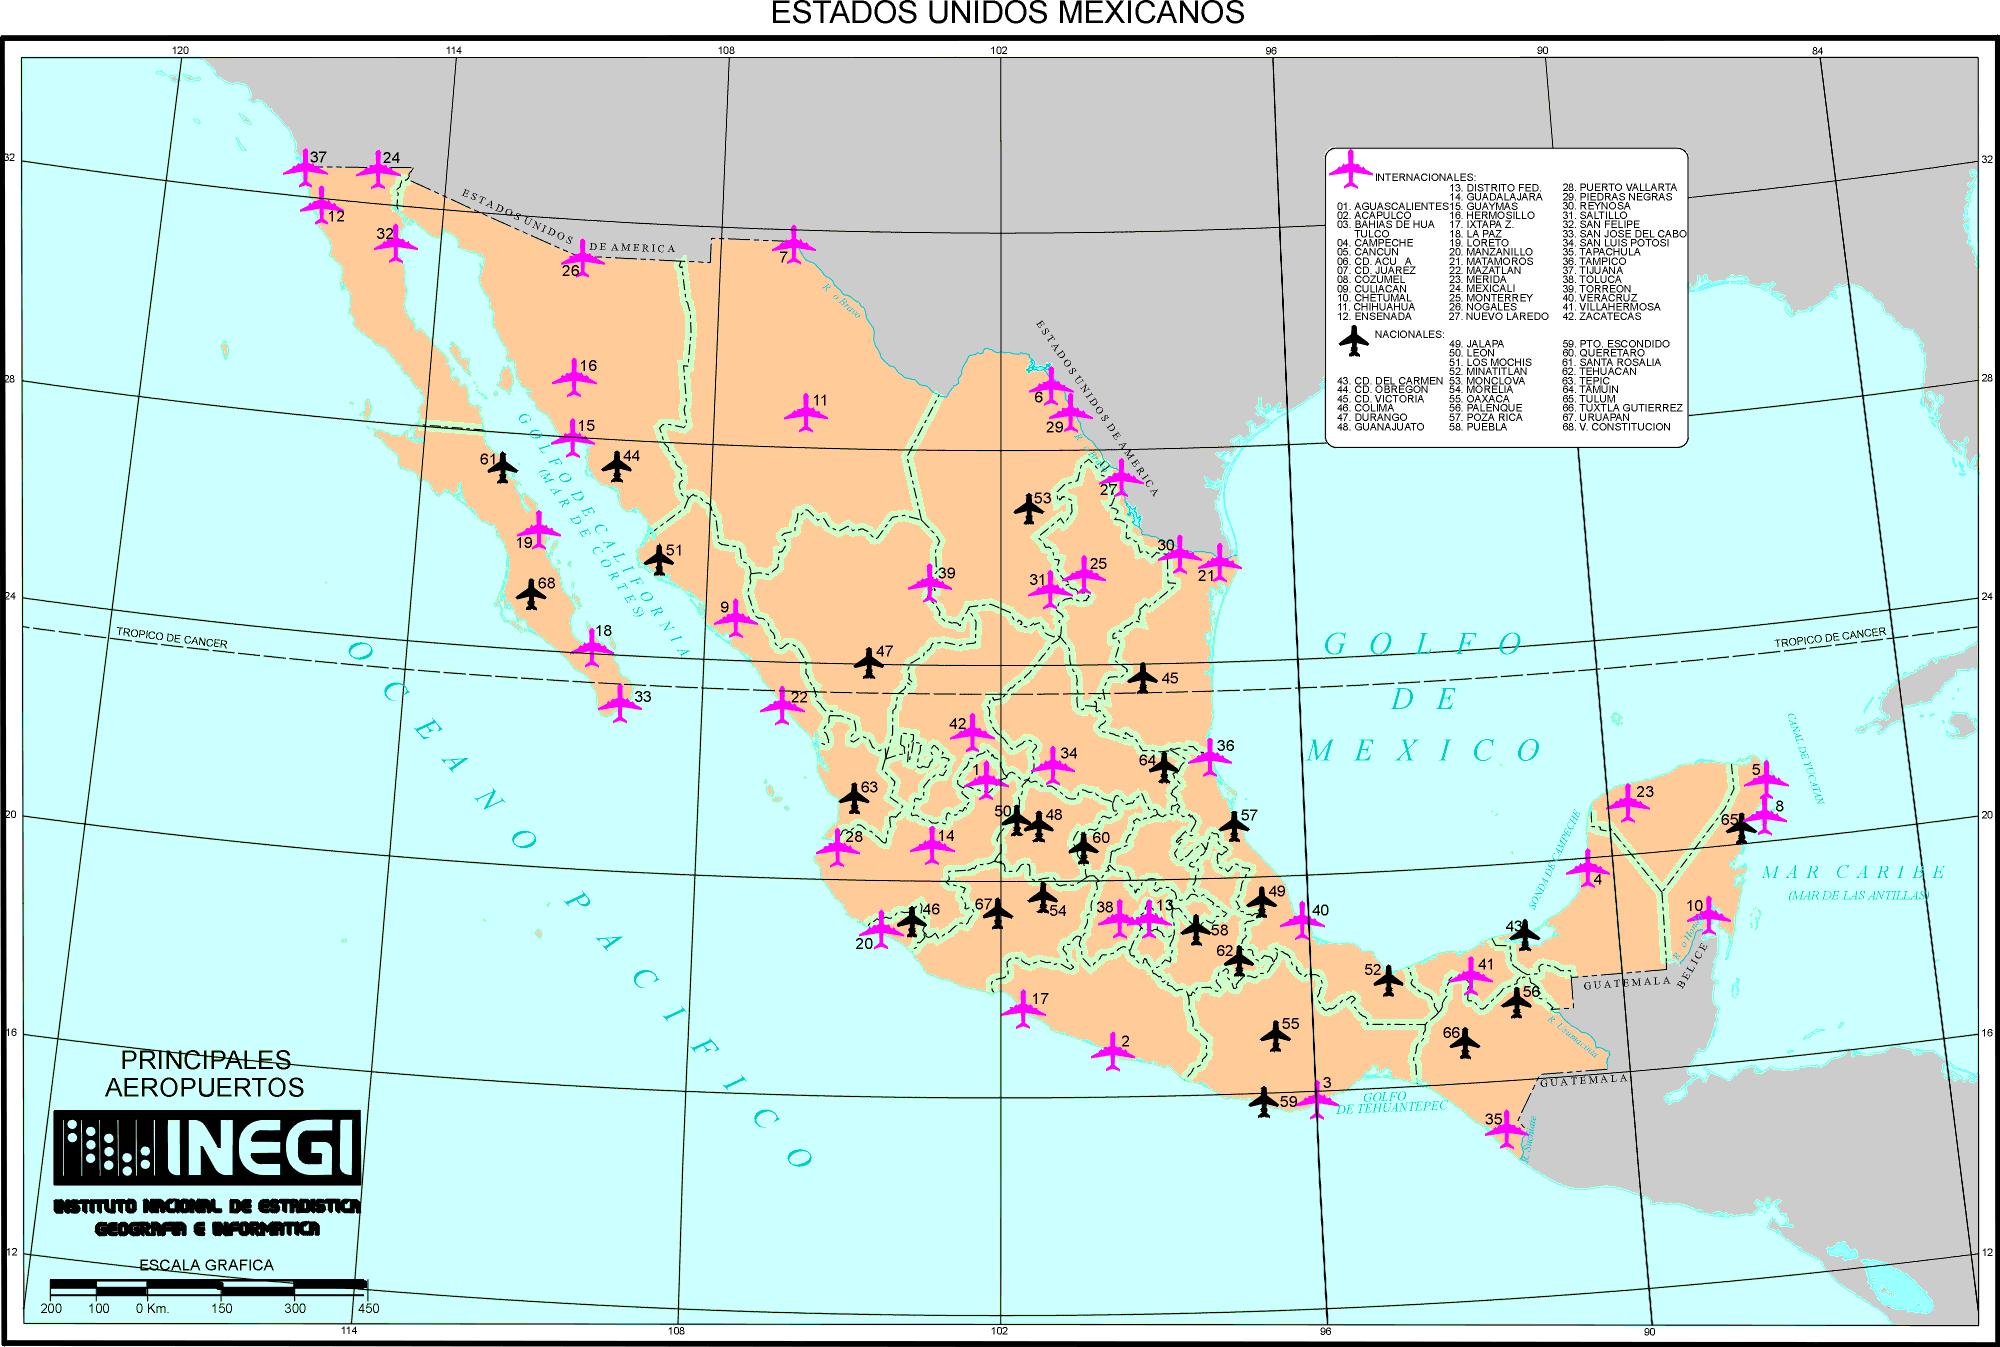 Map of Mexico airports: airports location and international airports of